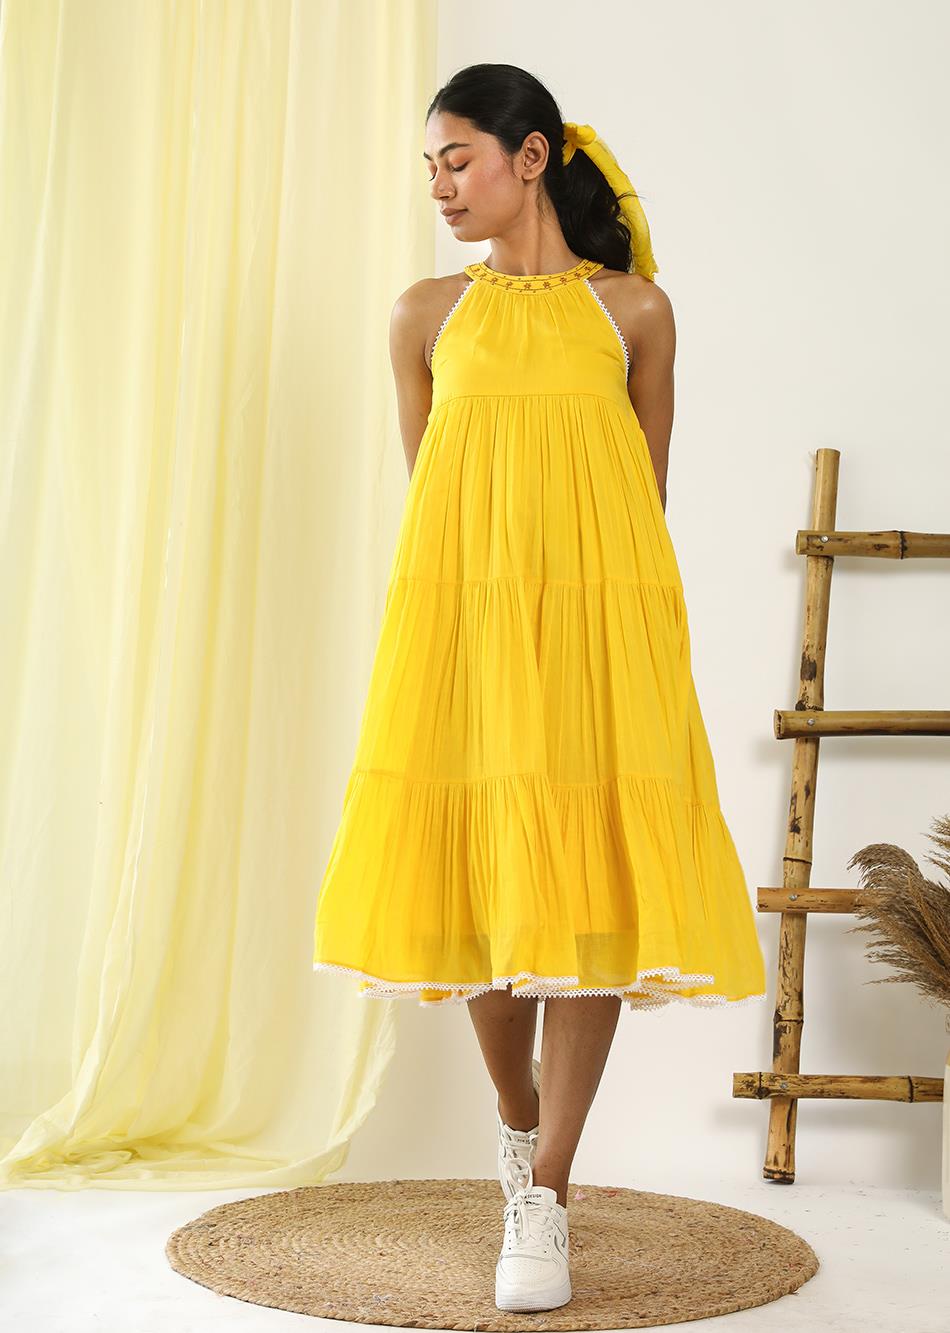 The Marigold Tiered Dress